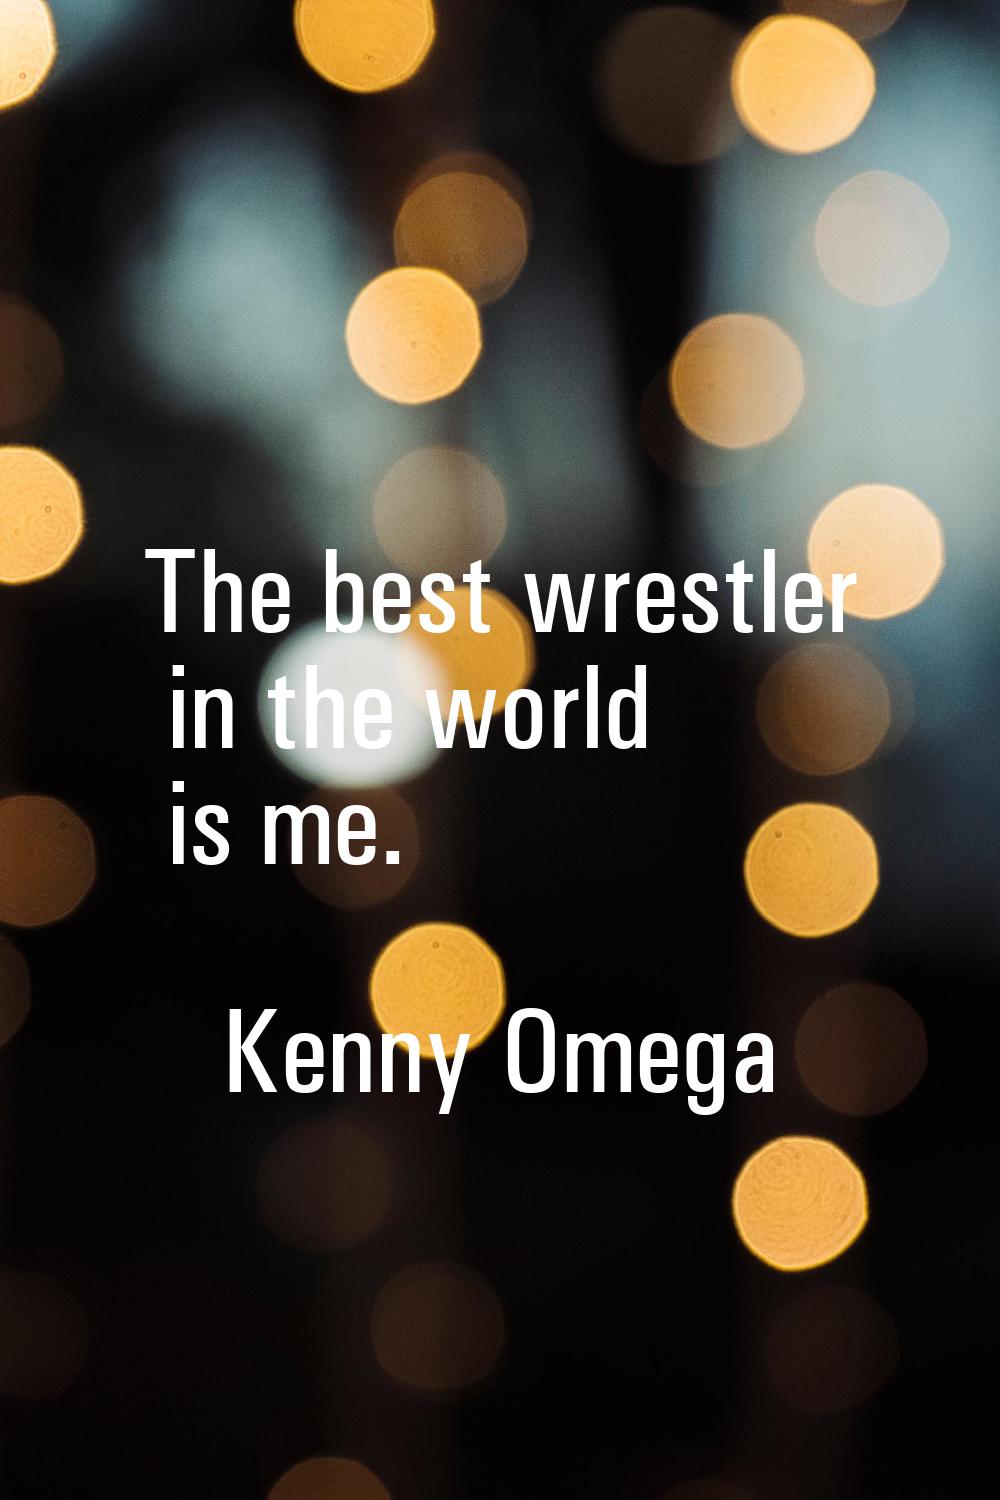 The best wrestler in the world is me.